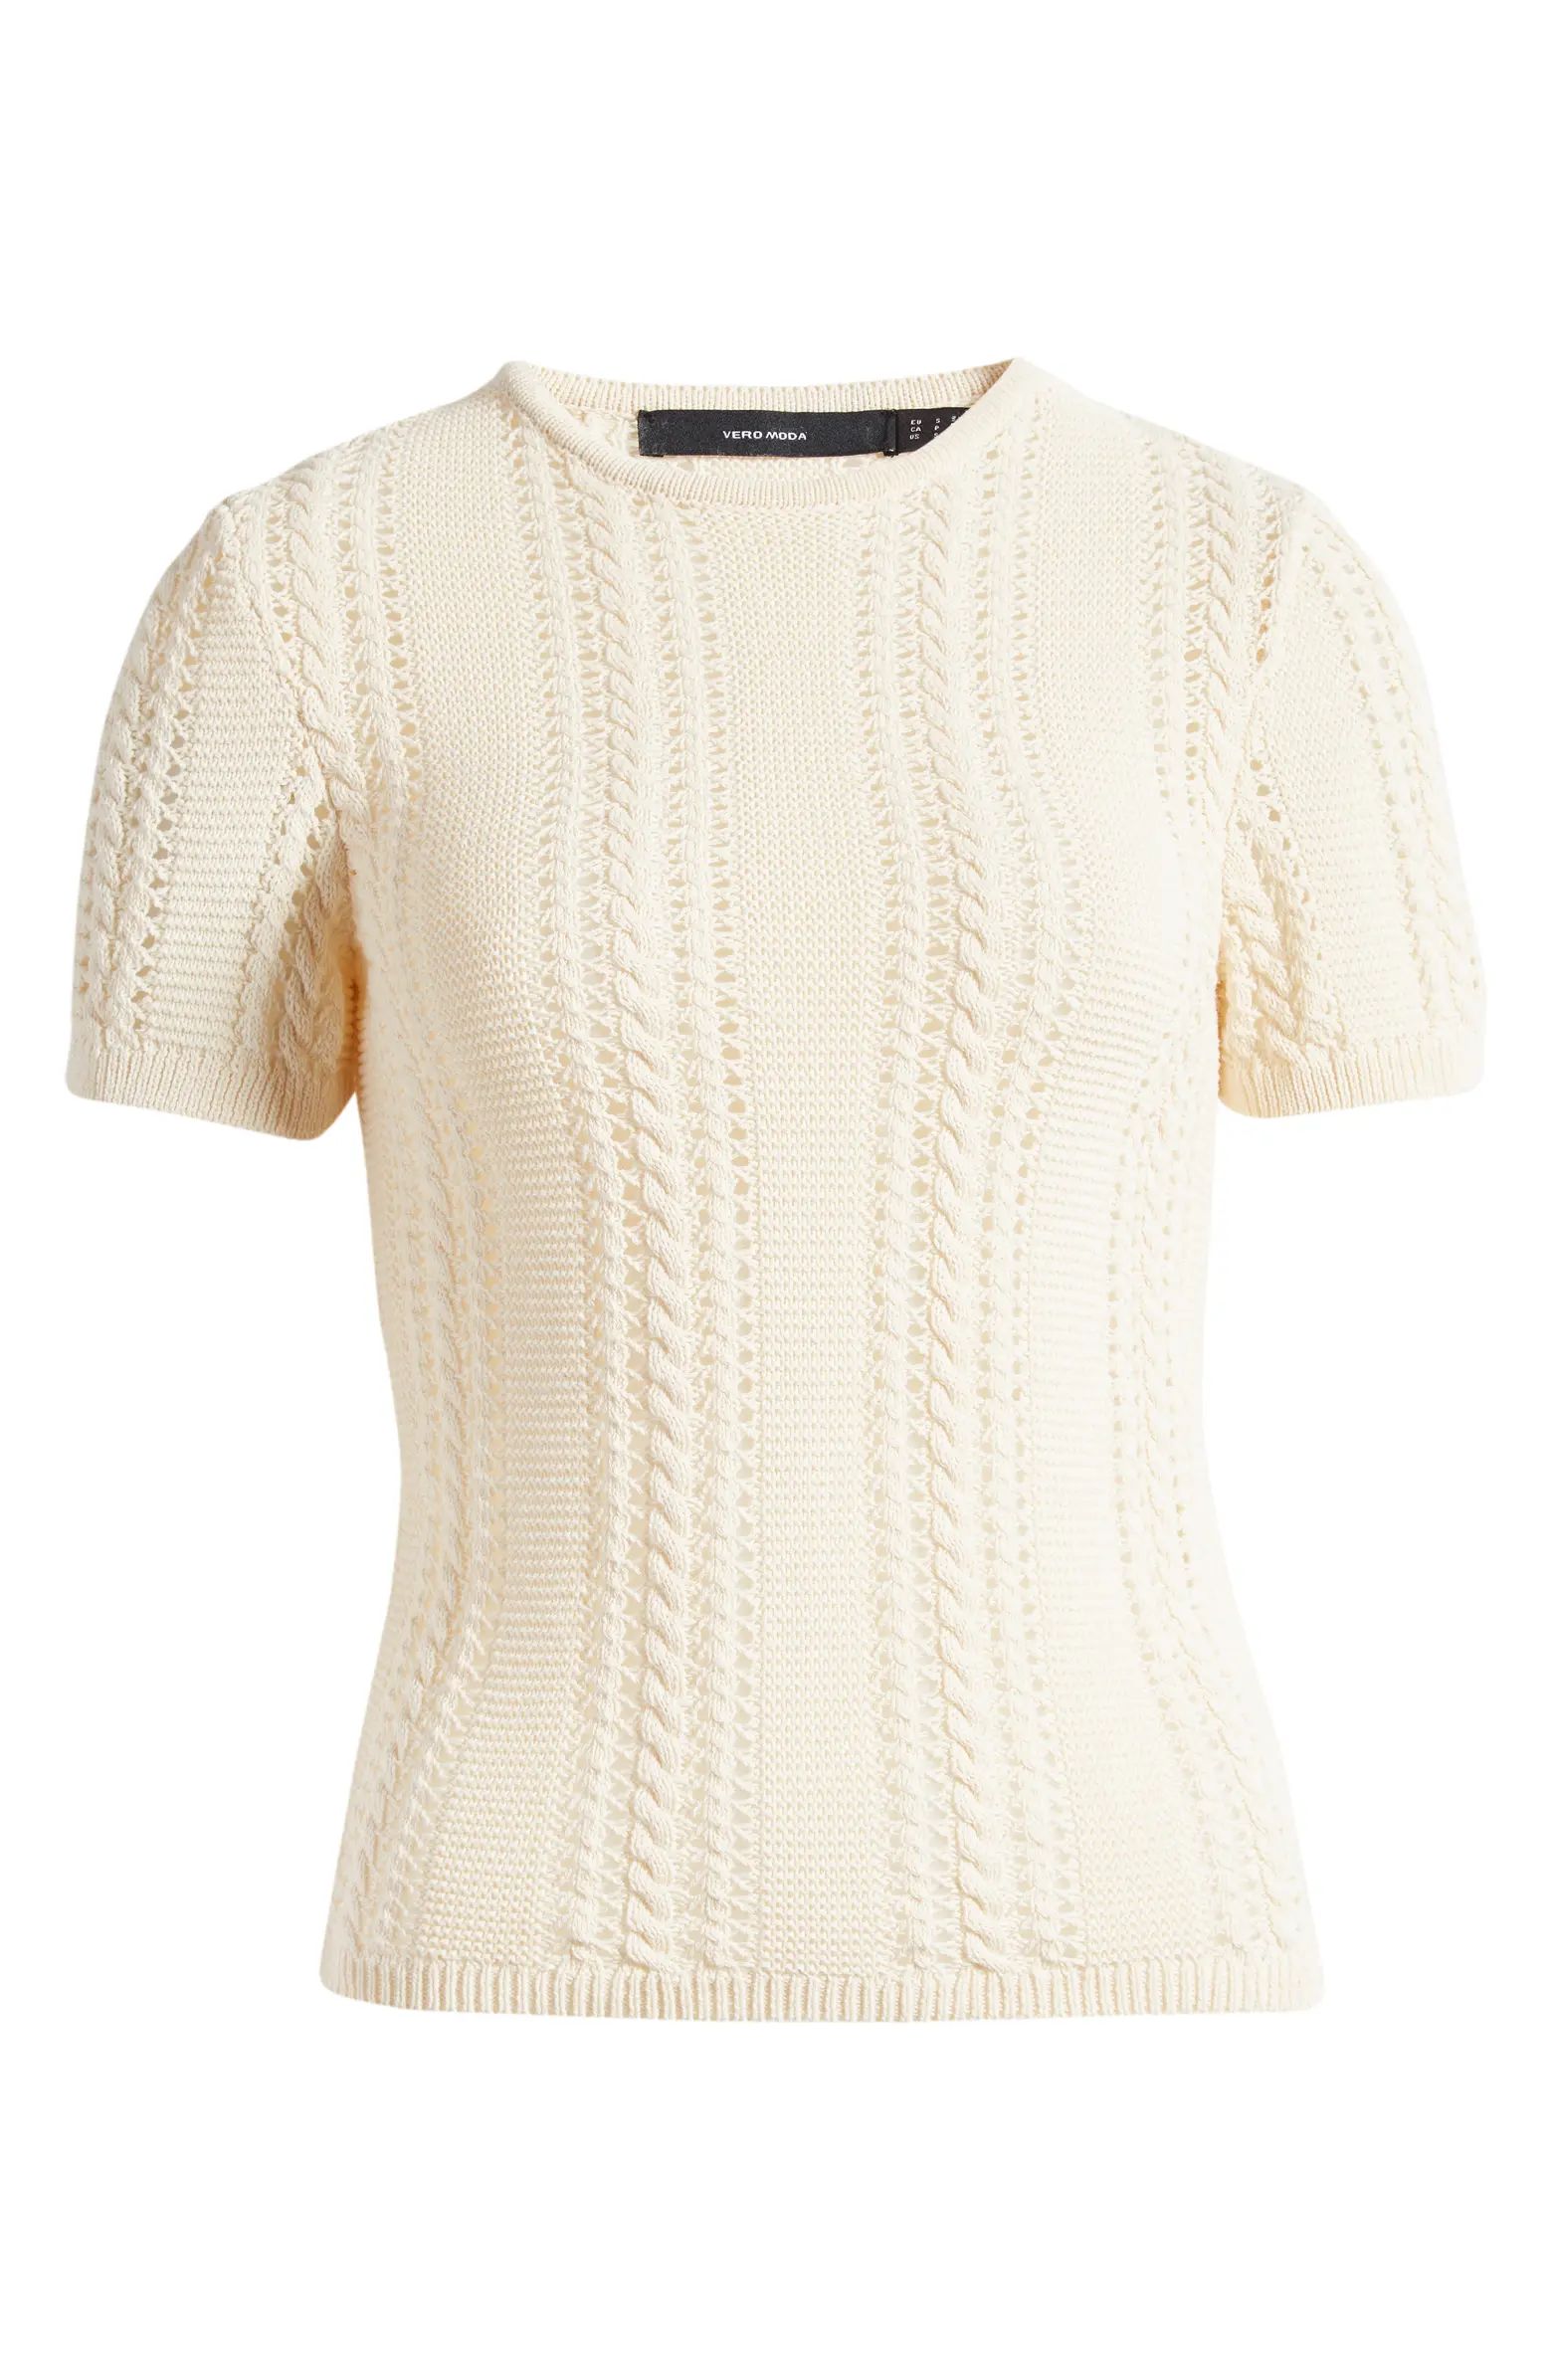 VERO MODA Nora Cable Detail Short Sleeve Cotton Blend Sweater | Nordstrom | Nordstrom